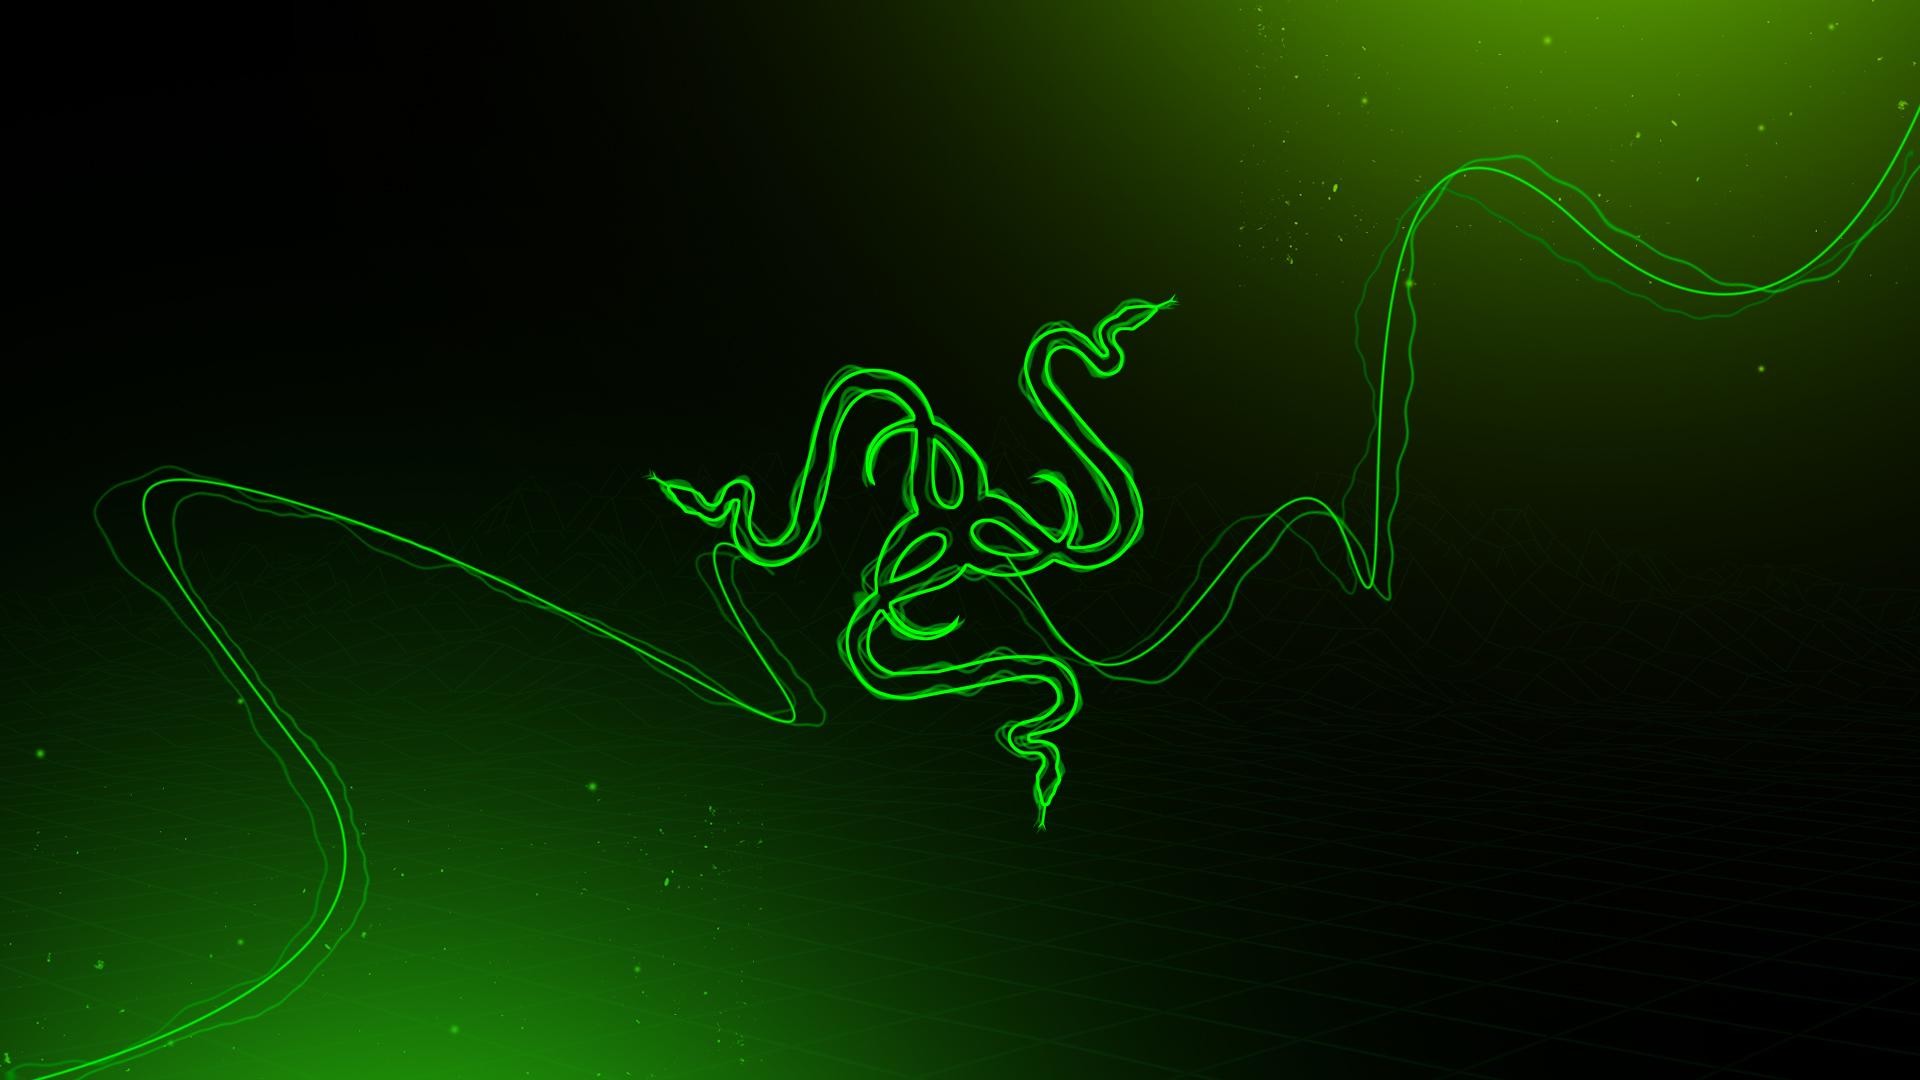 1920x1080 Original Razer wallpaper, feel free to use for your personal use .